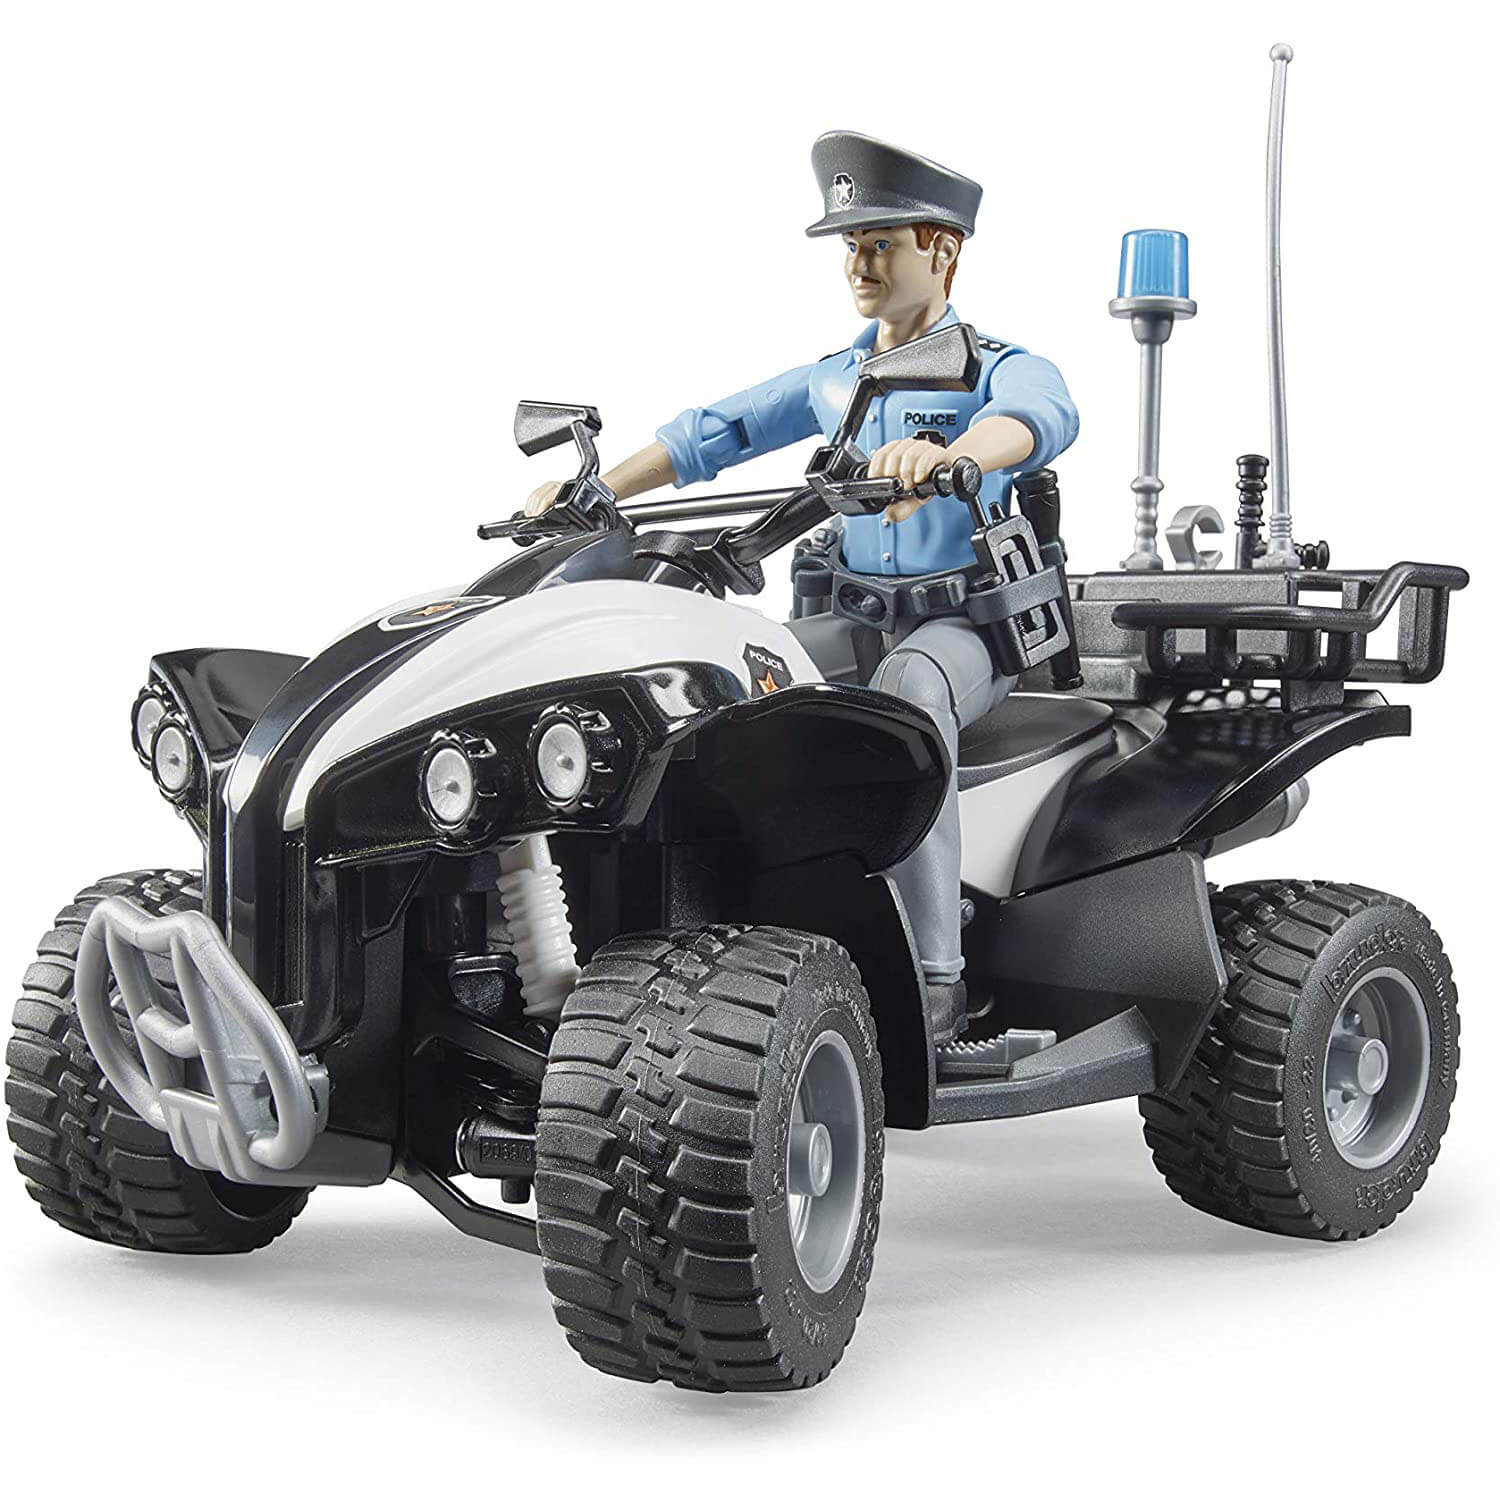 Bruder Pro Series 1:16 Scale Police Quad with Policeman and Accessories